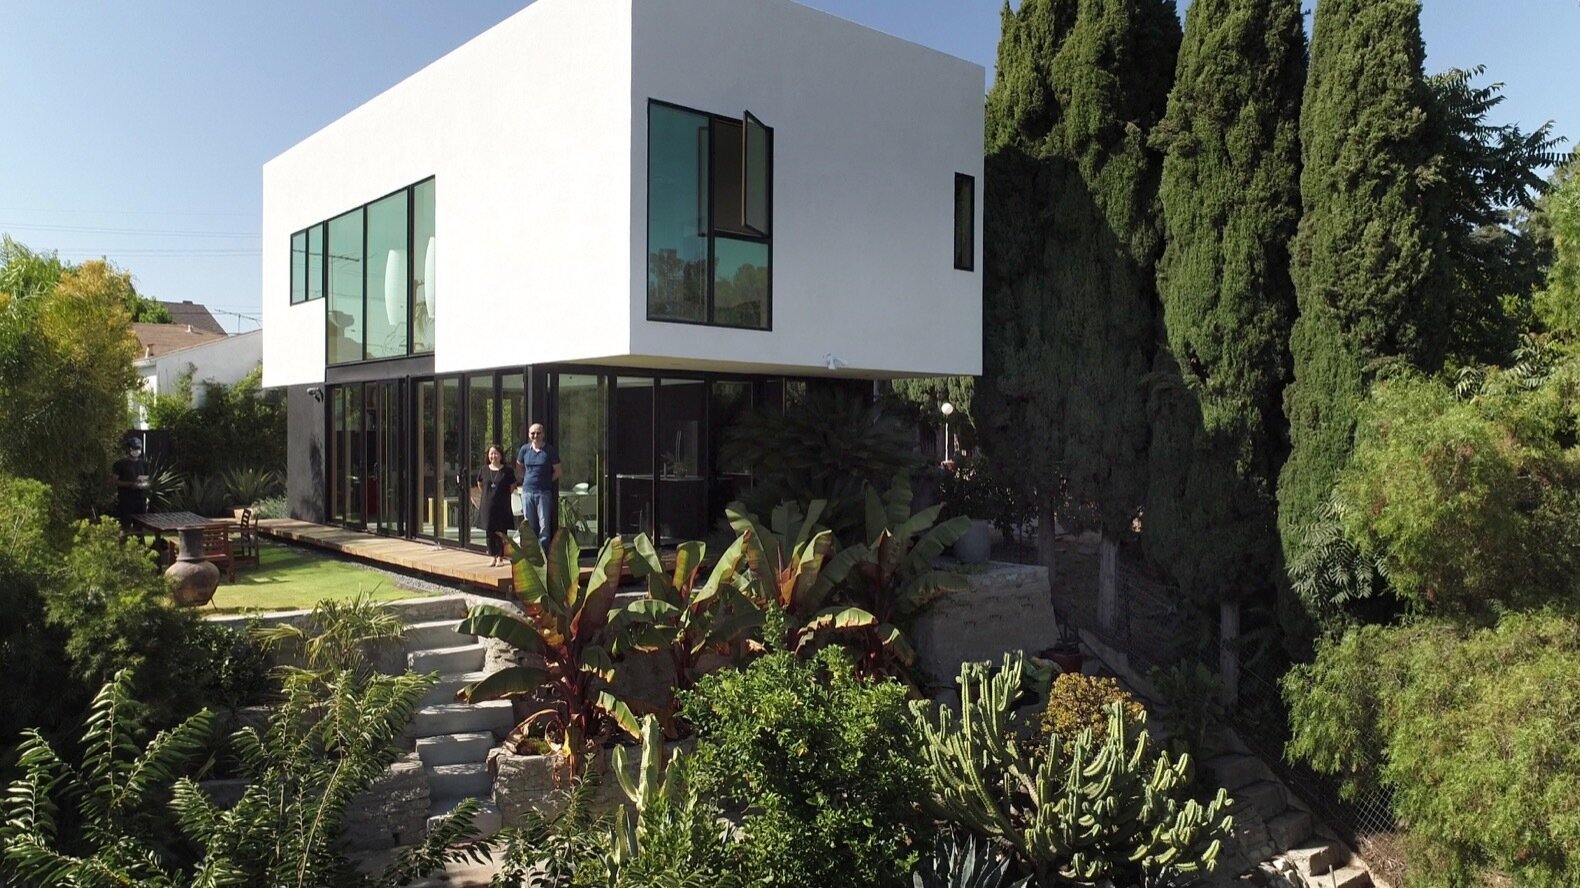 With Three Good Reasons and $400K, an L.A. Couple Build the ADU of Their Dreams